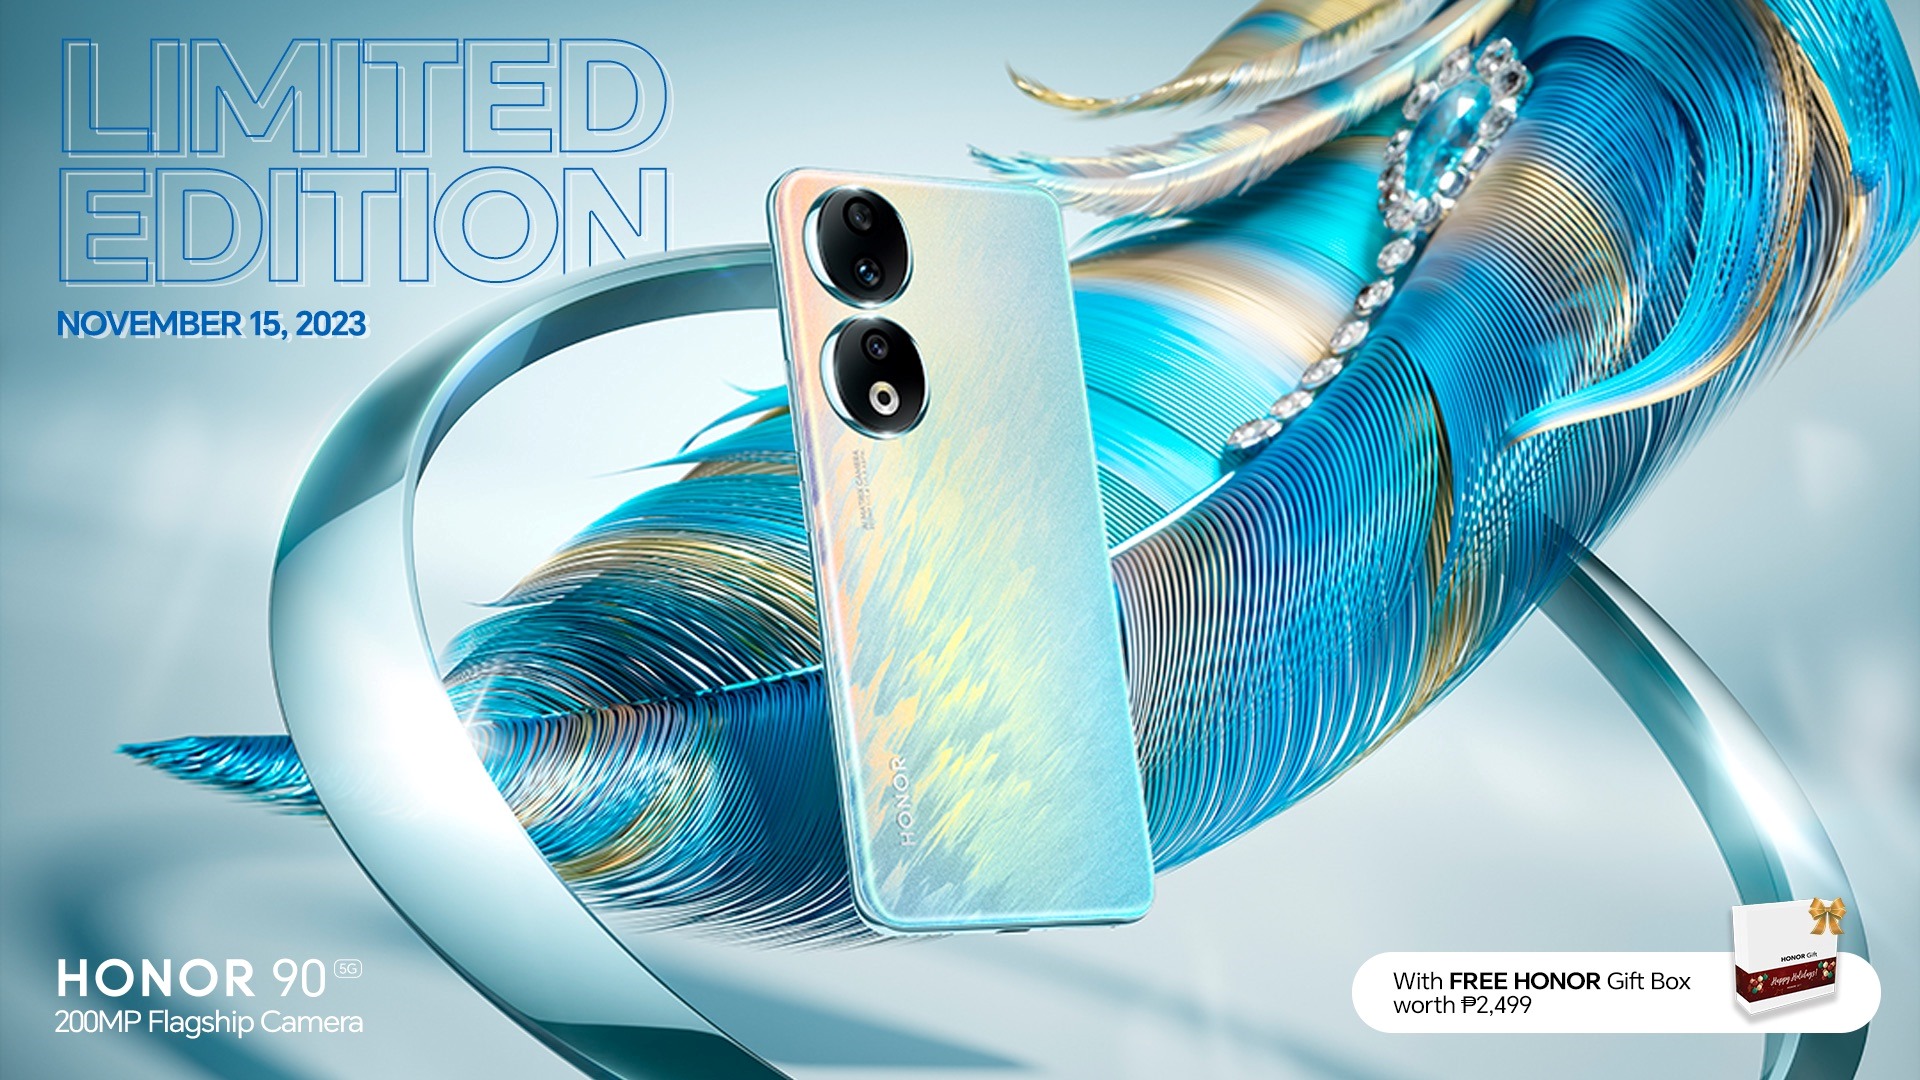 Limited-edition HONOR 90 5G Peacock Blue in Philippines